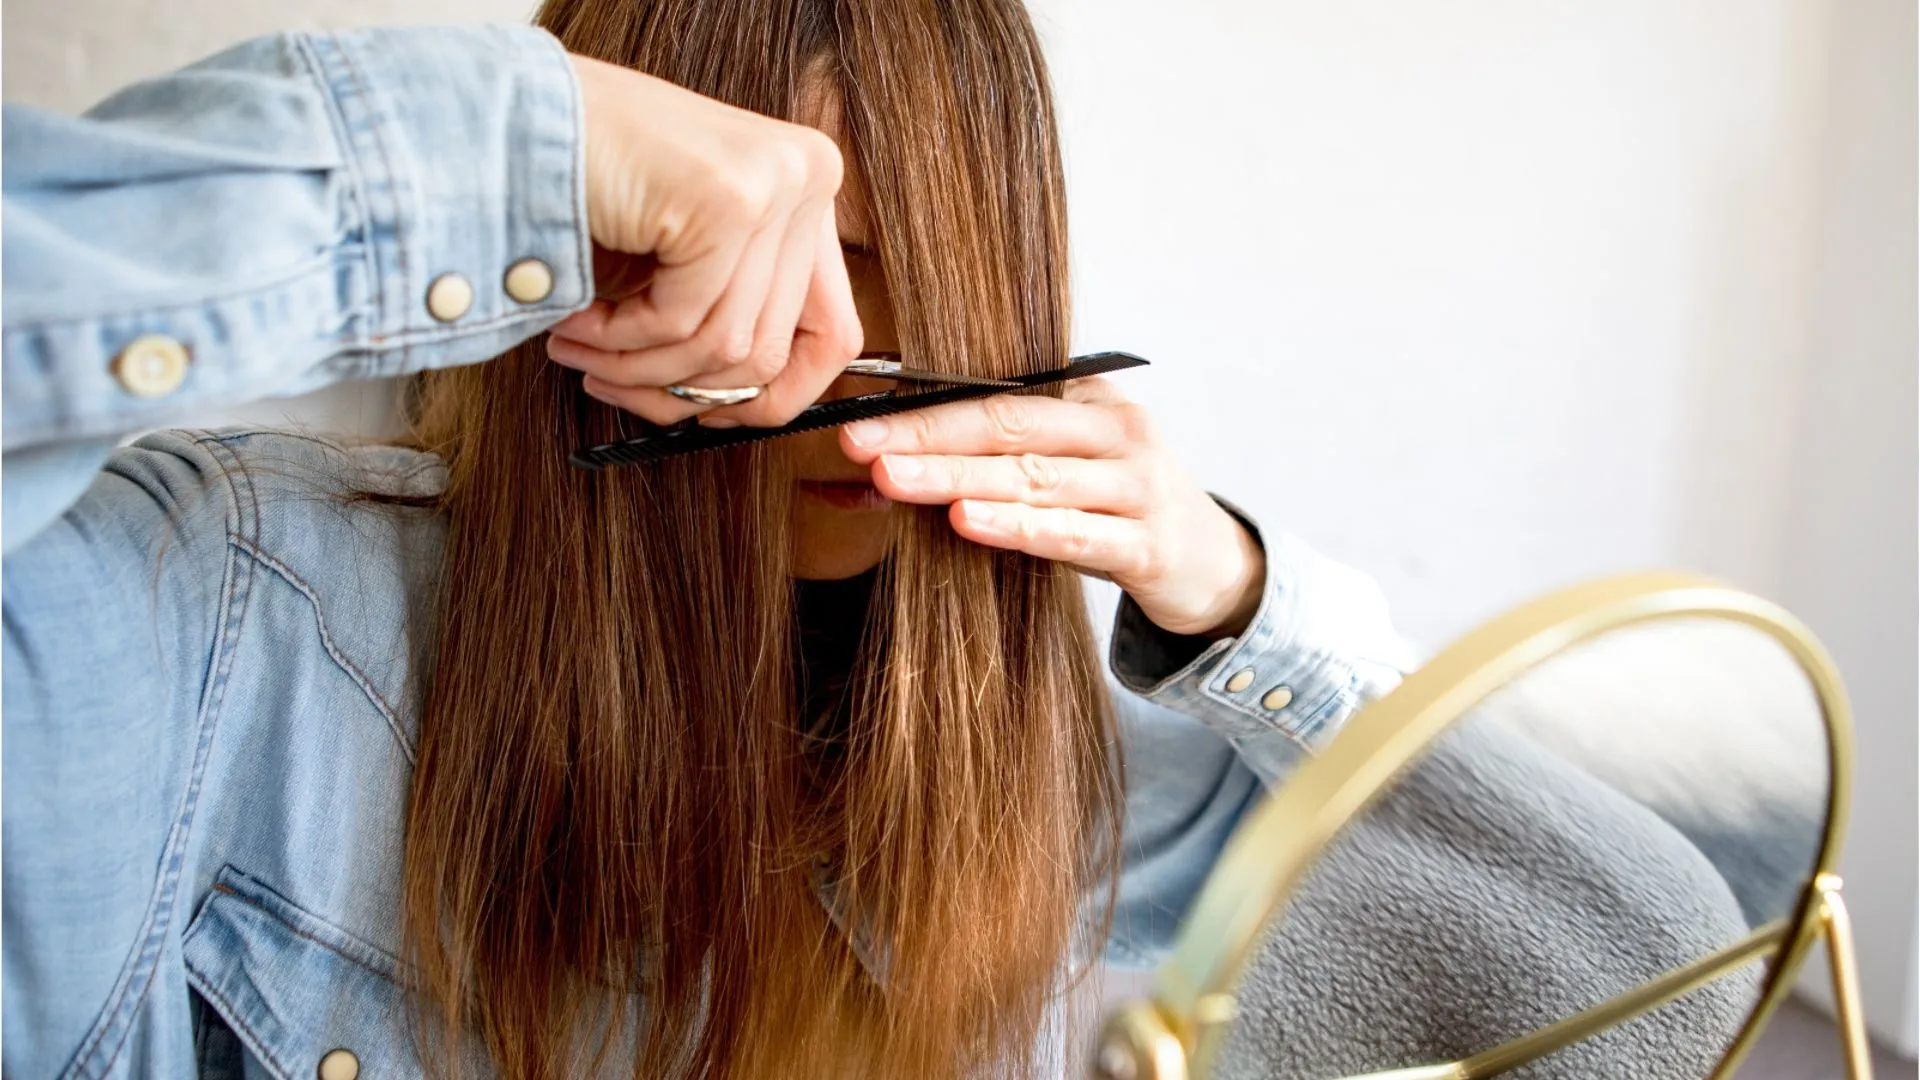 Cut your own hair: The most important tips for DIY hairstyles